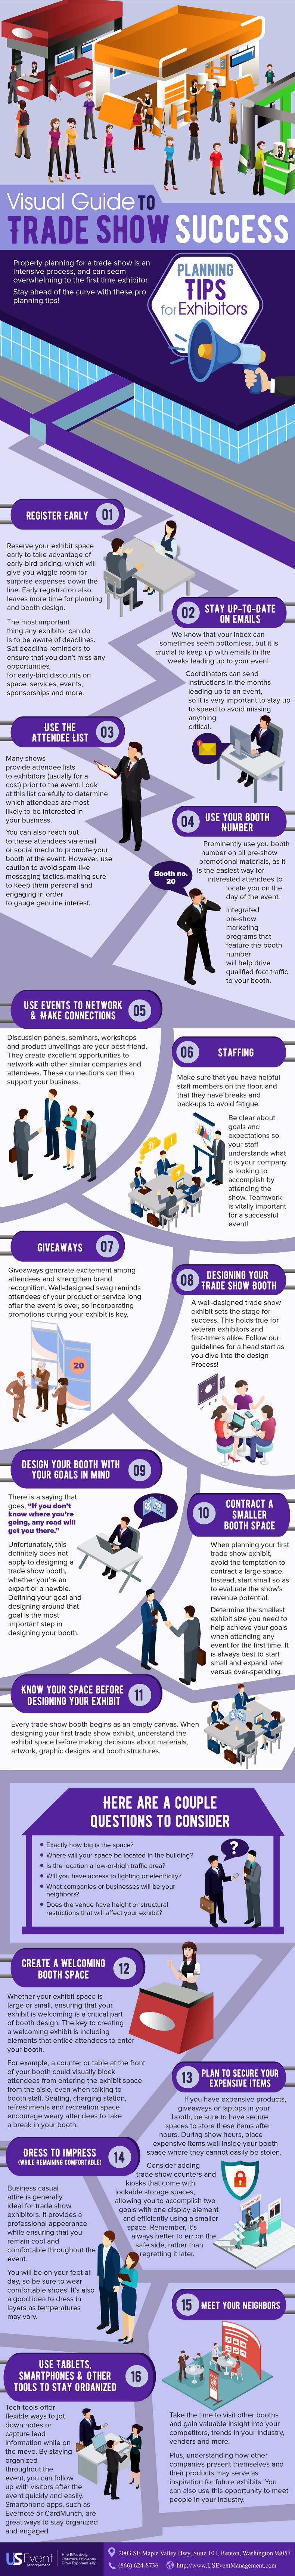 trade show best practices infographic